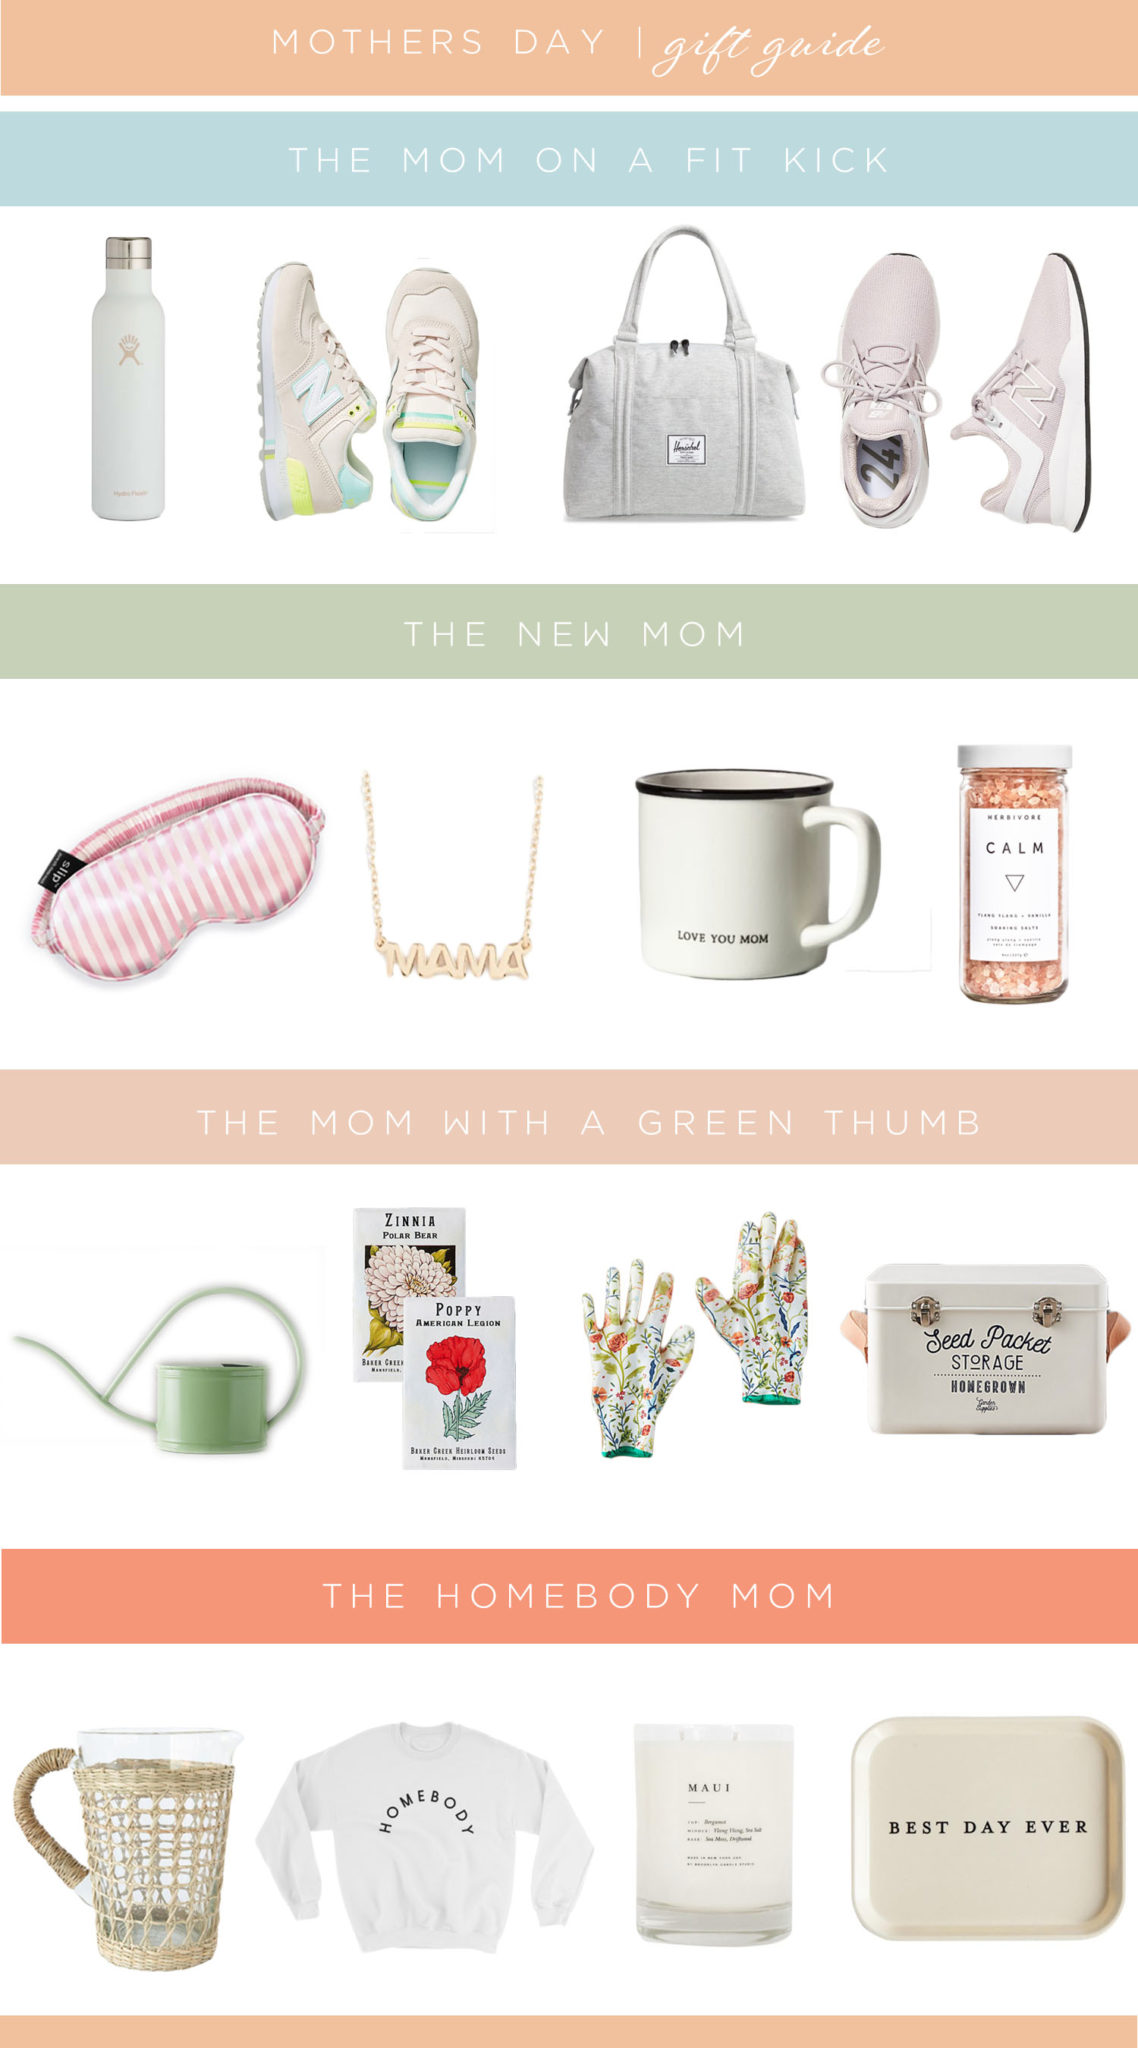 mothers day gift guide - new mom